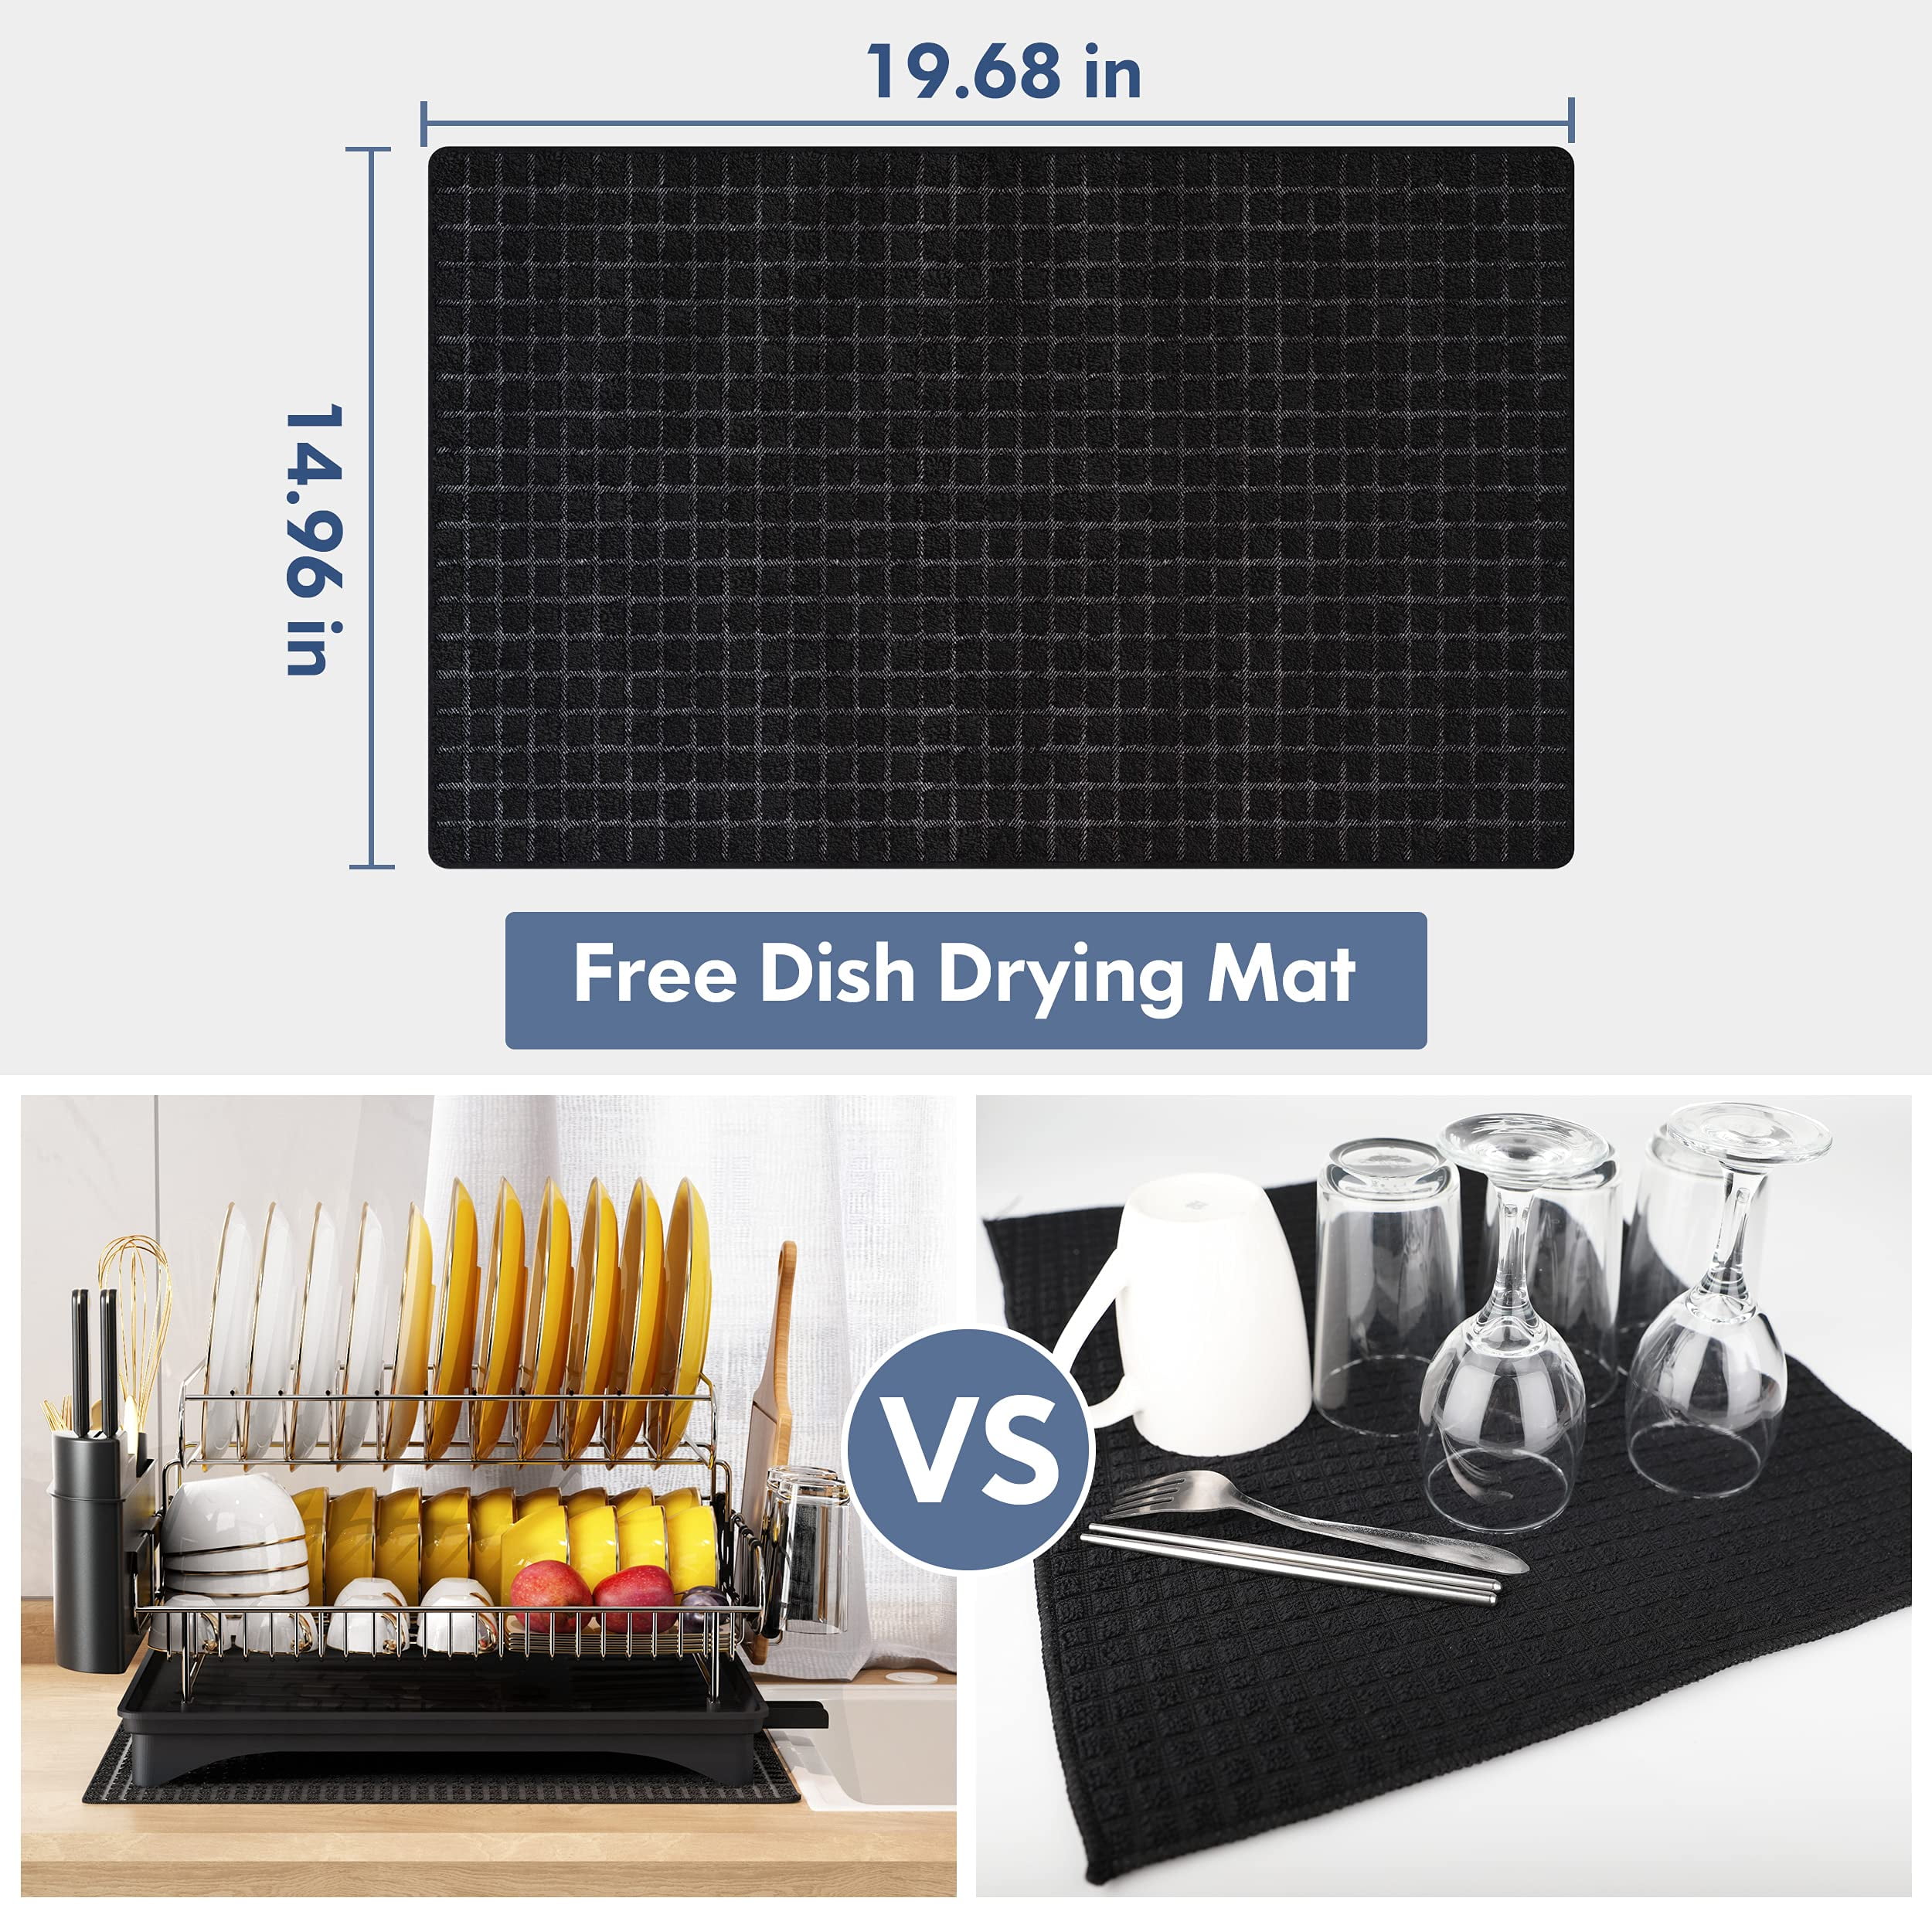  MAJALiS 304 Stainless Steel Dish Drying Rack, Large Dish Rack  and Drainboard Set, 2 Tier Dish Drainers for Kitchen Counter with Cutting  Board Holder, Cup Holders, Utensil Holder and Drying Mat